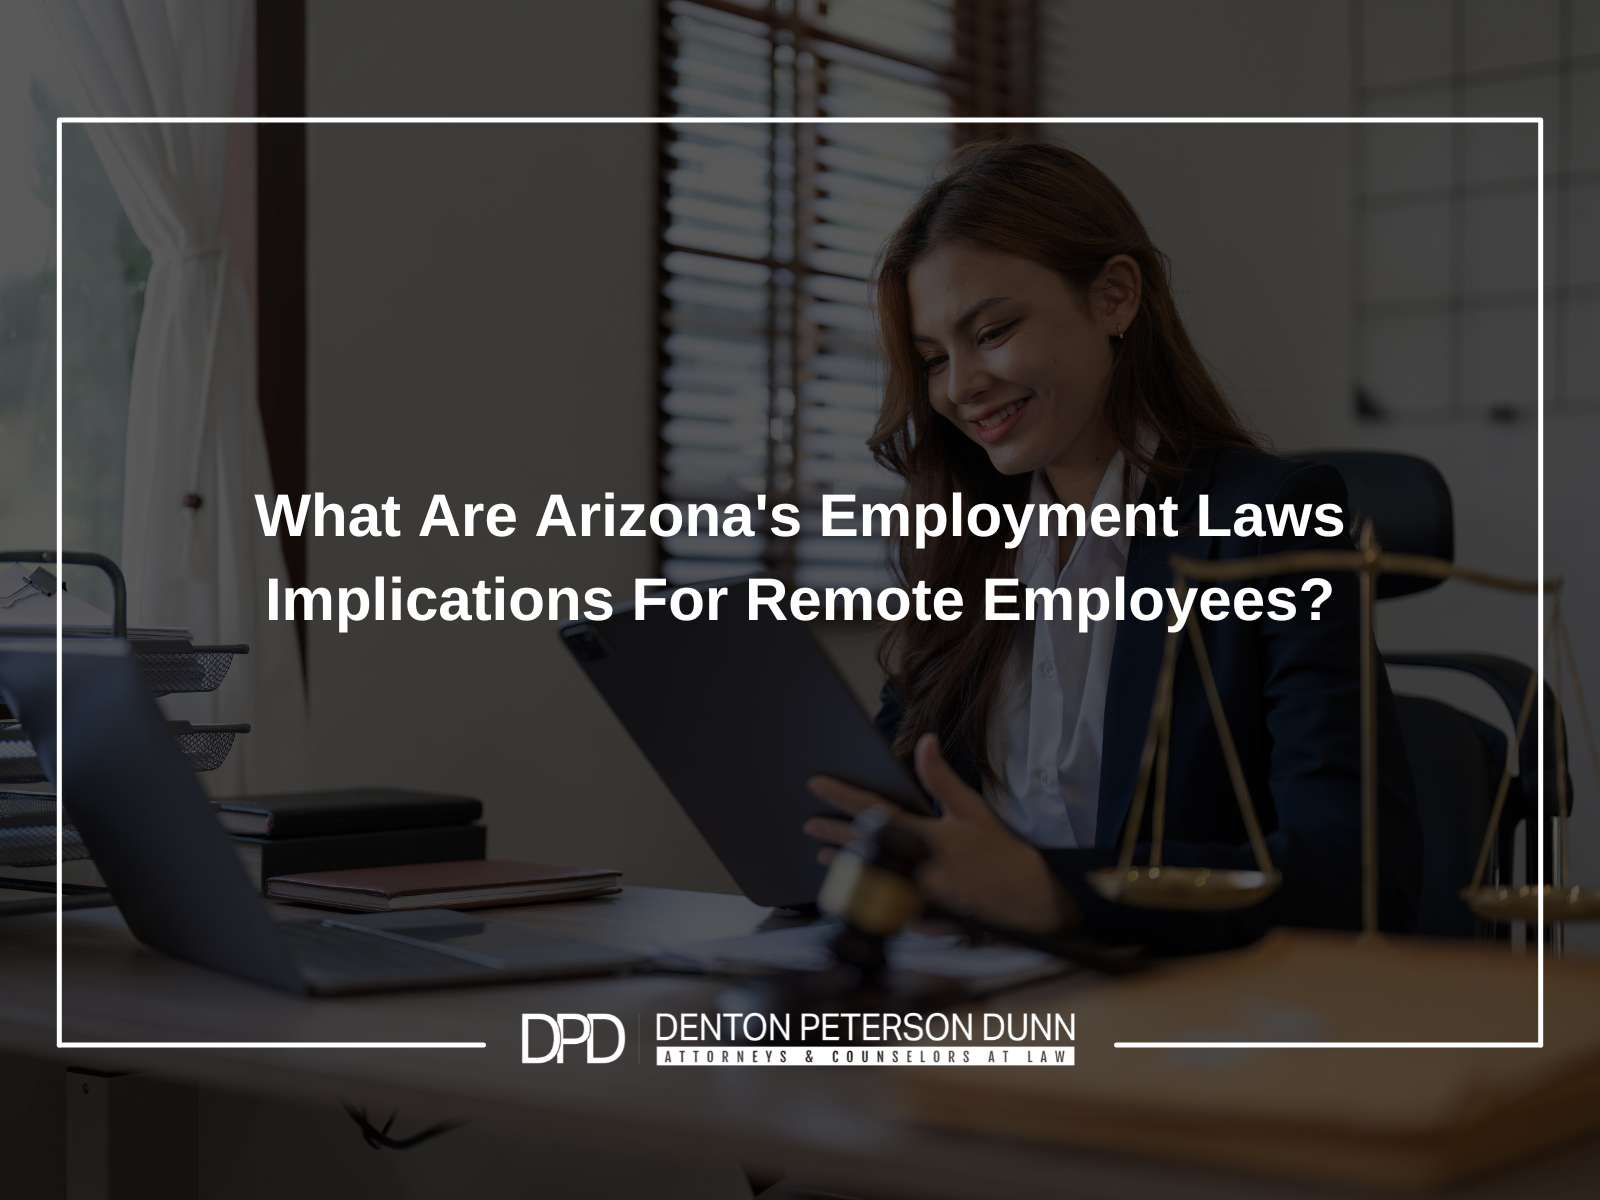 What Are Arizona’s Employment Laws Implications For Remote Employees?